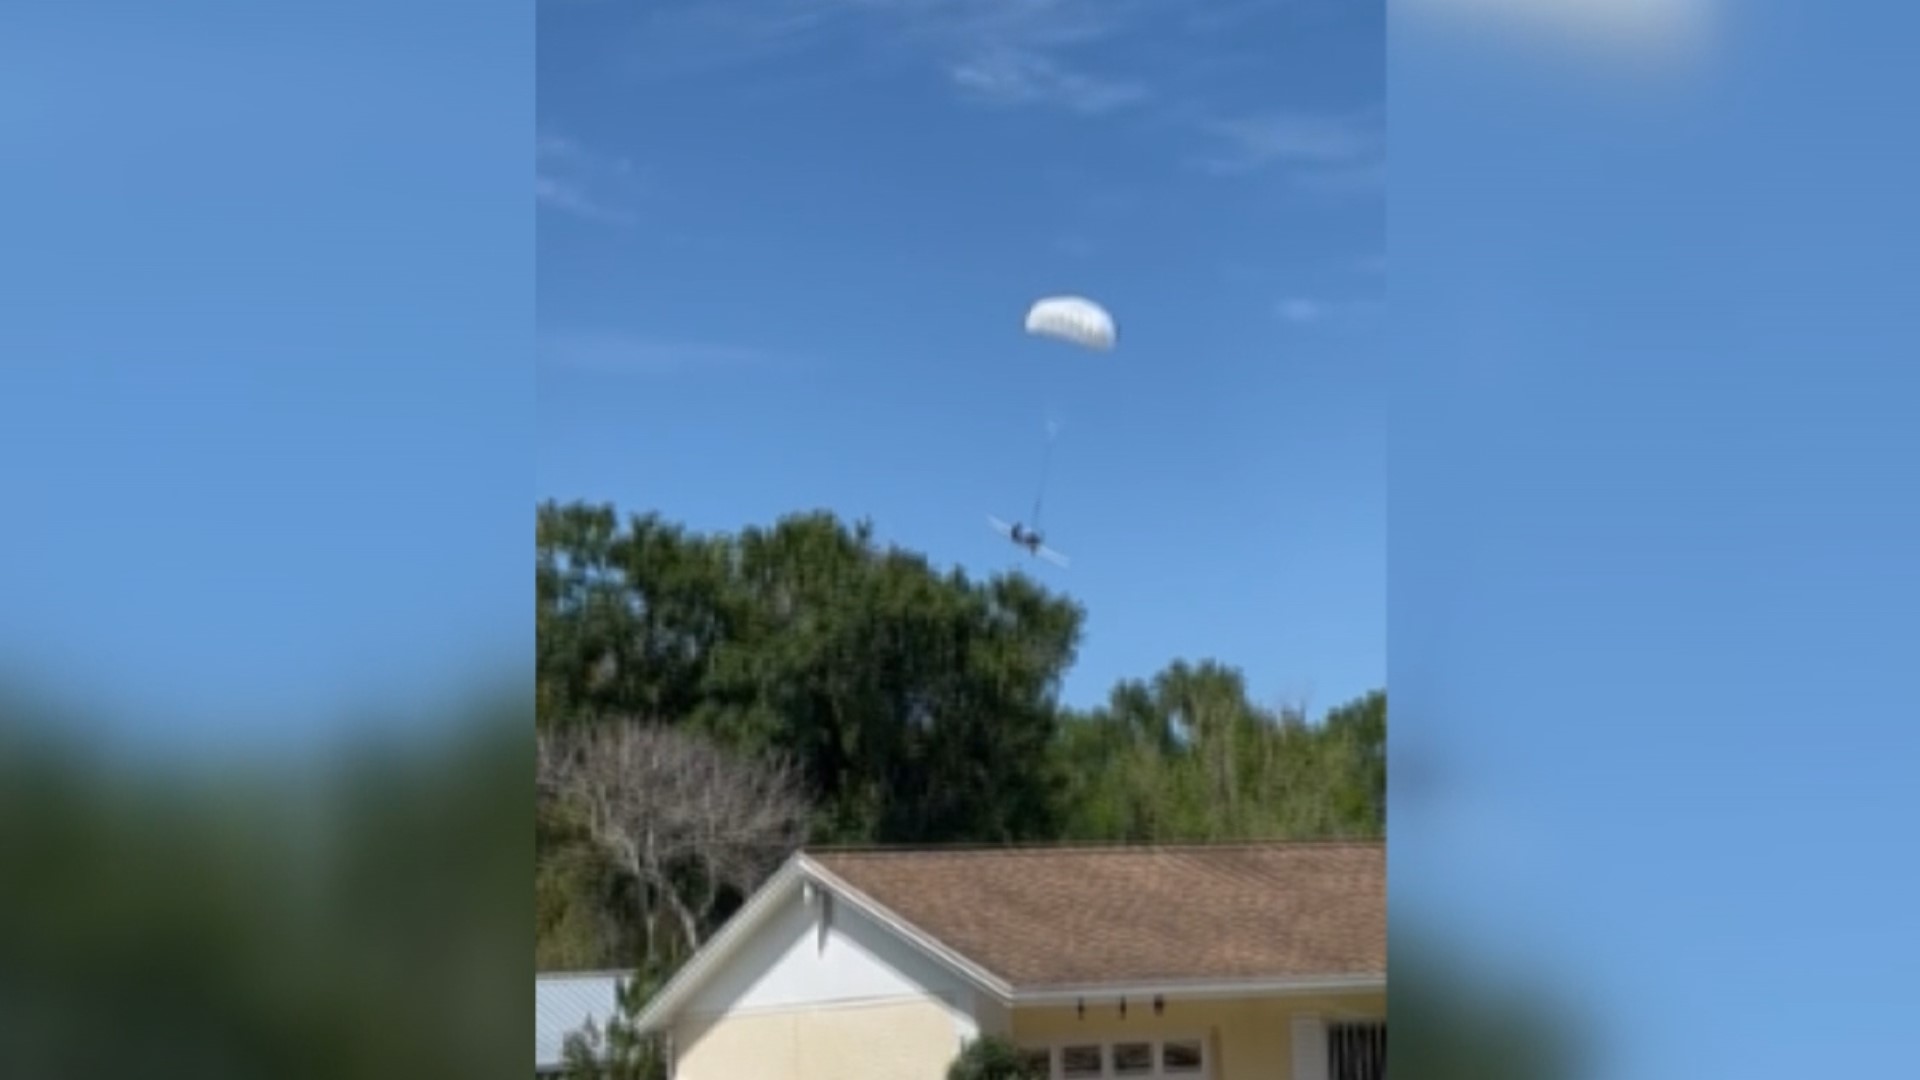 Kendry Liranza captured the moment a small plane floated to the ground after its parachute deployed in Brandon, Florida.